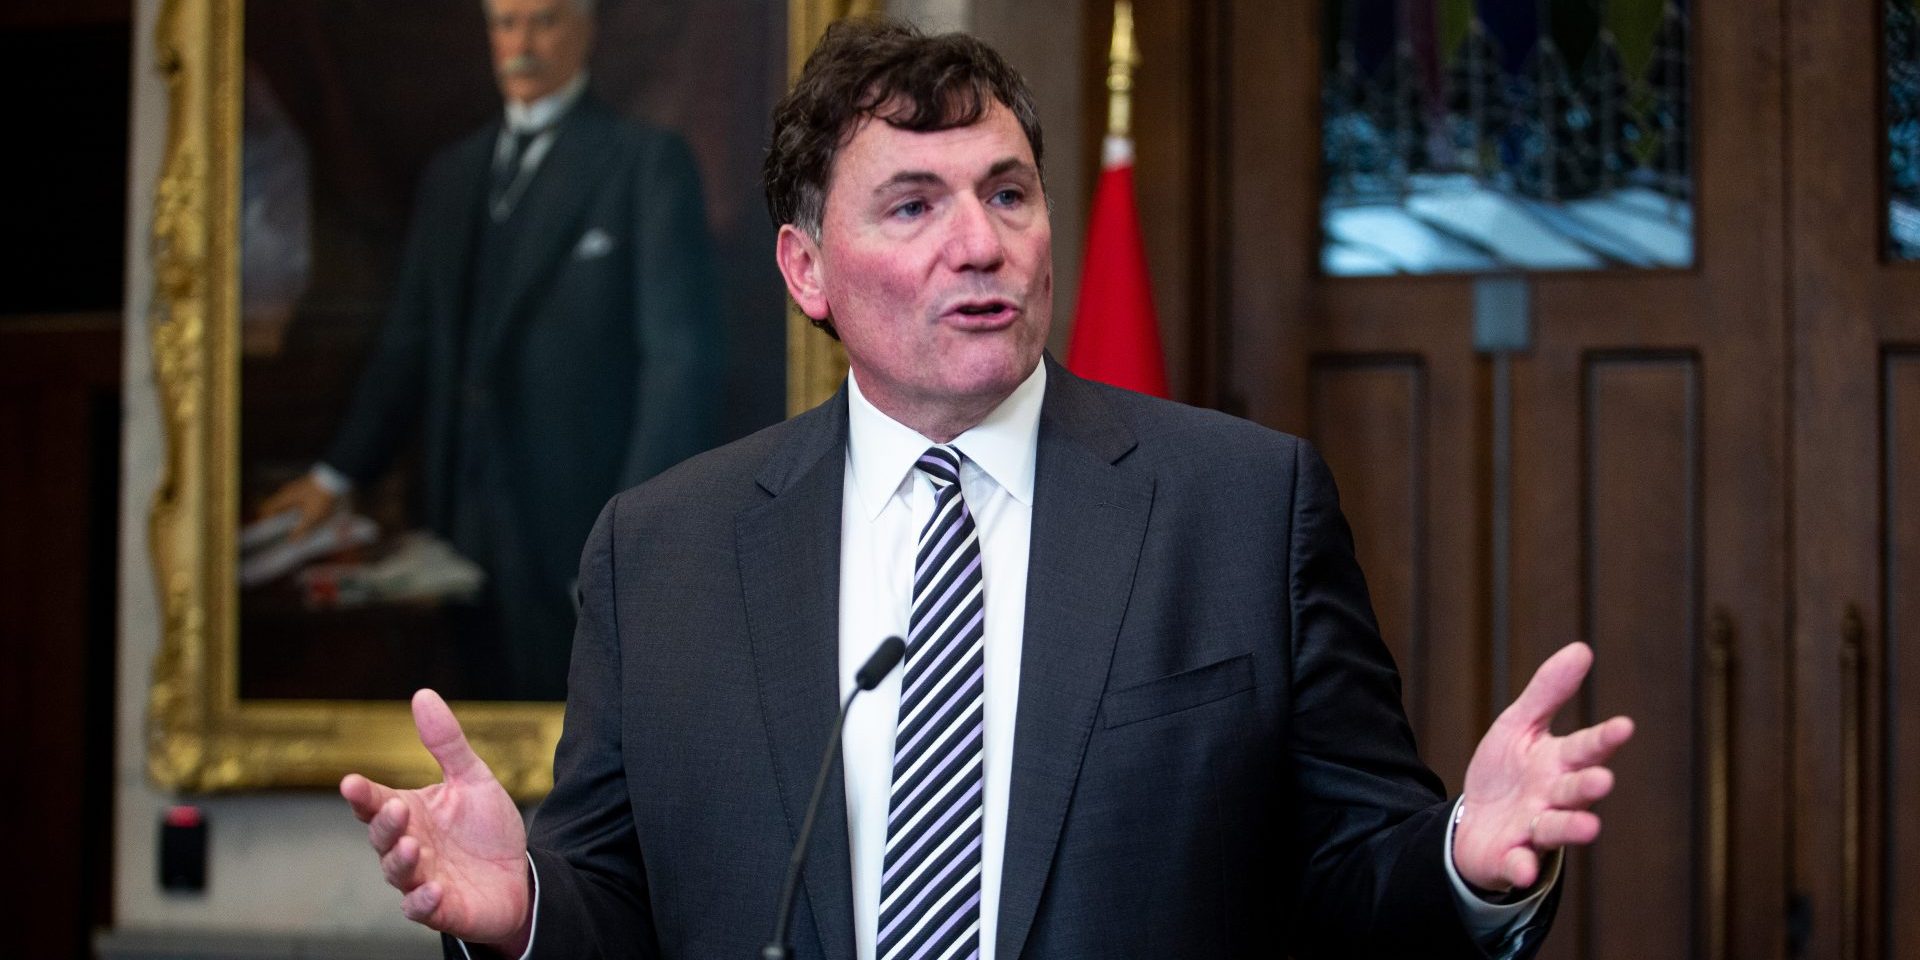 Minister of Intergovernmental Affairs, Infrastructure and Communities, the Honourable Dominic LeBlanc, makes a statement and take questions from media in the House of Commons foyer on  June 10, 2023,  about foreign interference and the resignation of the Independent Special Rapporteur, the Right Honourable David Johnston.